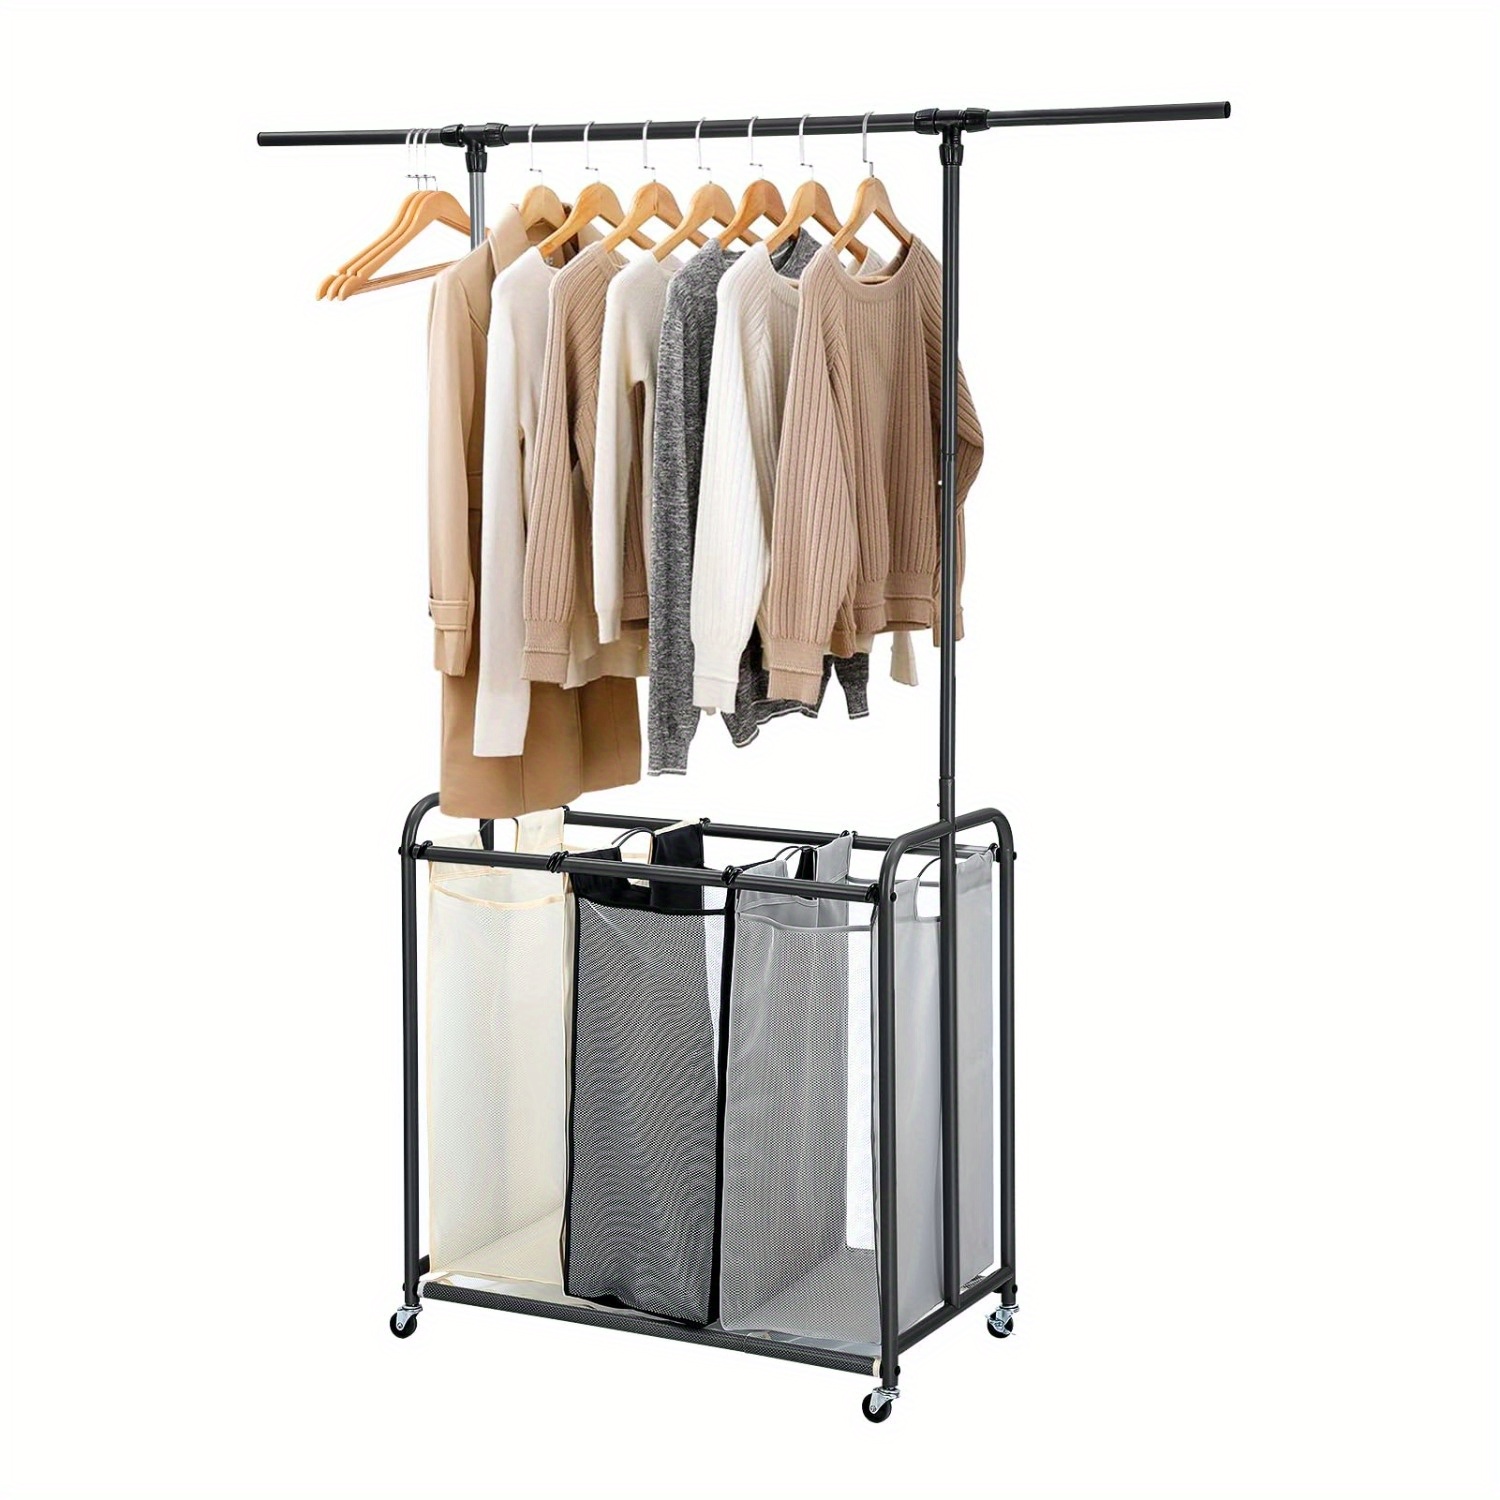 

Laundry Sorter With Extendable Hanging Bar, Laundry Hamper Cart With 3 Colors Removable Bags, Heavy Duty Lockable Wheels, Laundry Organizer Cart For Laundry Room Bed Room Clothes Storage